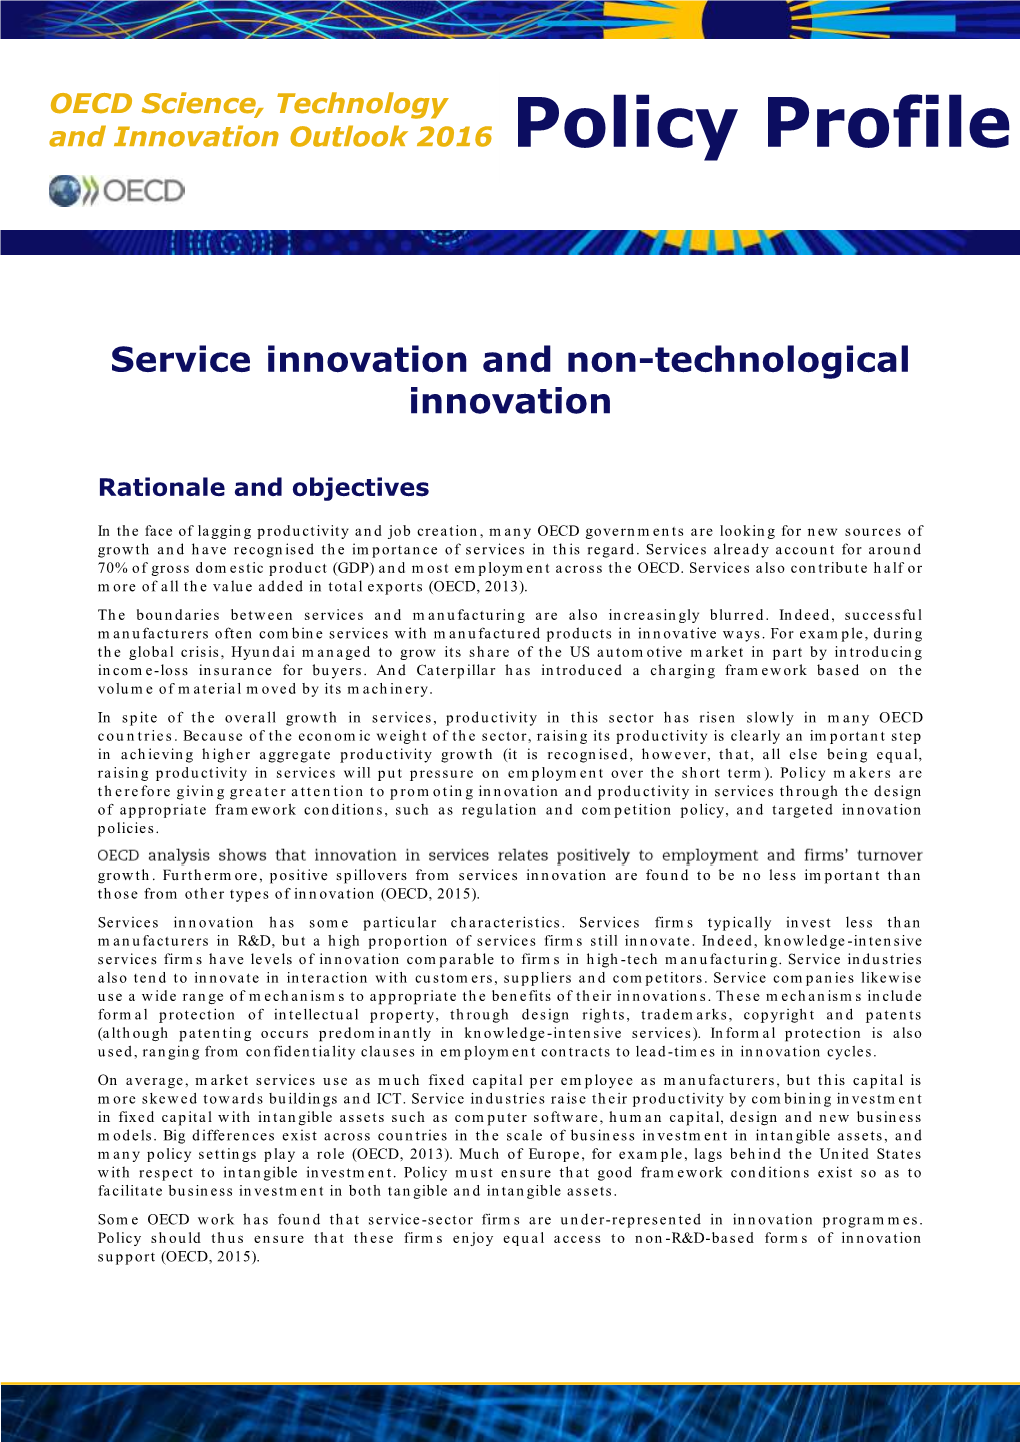 Service Innovation and Non-Technological Innovation